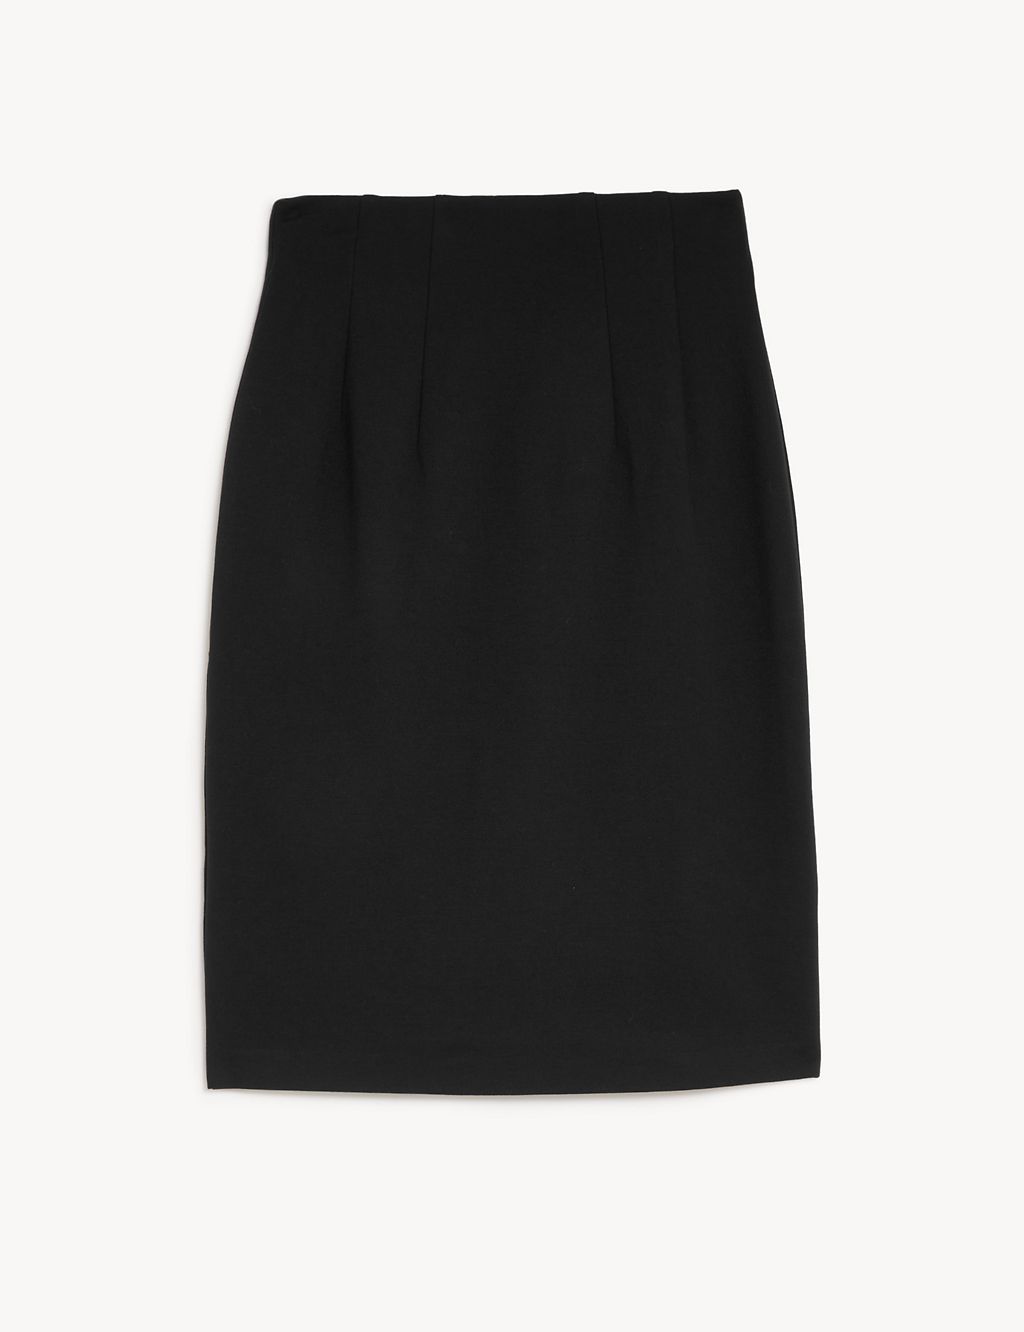 Jersey Knee Length Pencil Skirt | M&S Collection | M&S